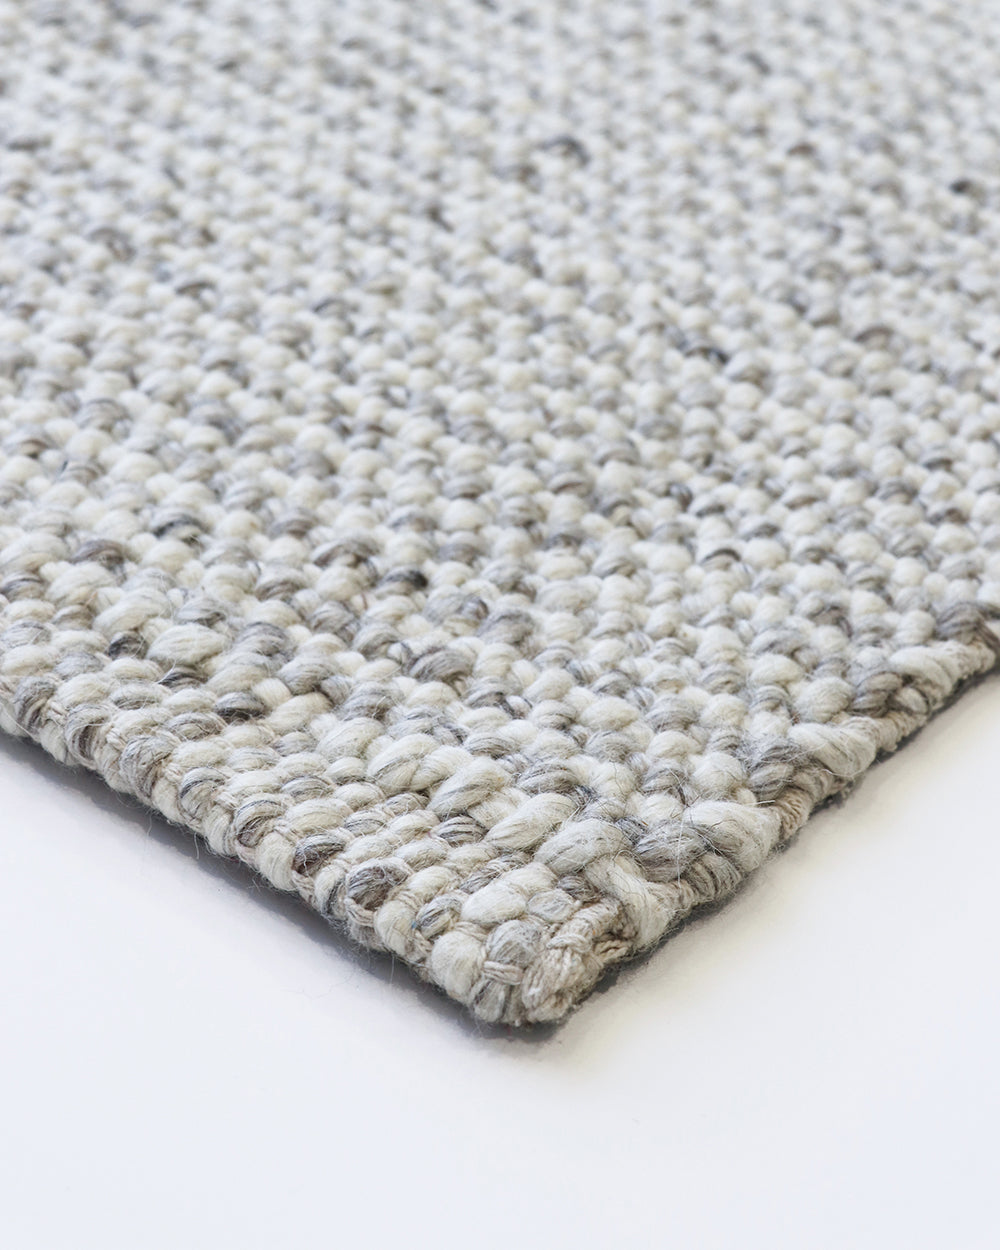 Kansas Oyster Natural Rug from Baya Furtex Stockist Make Your House A Home, Furniture Store Bendigo. Free Australia Wide Delivery. Mulberi Rugs.